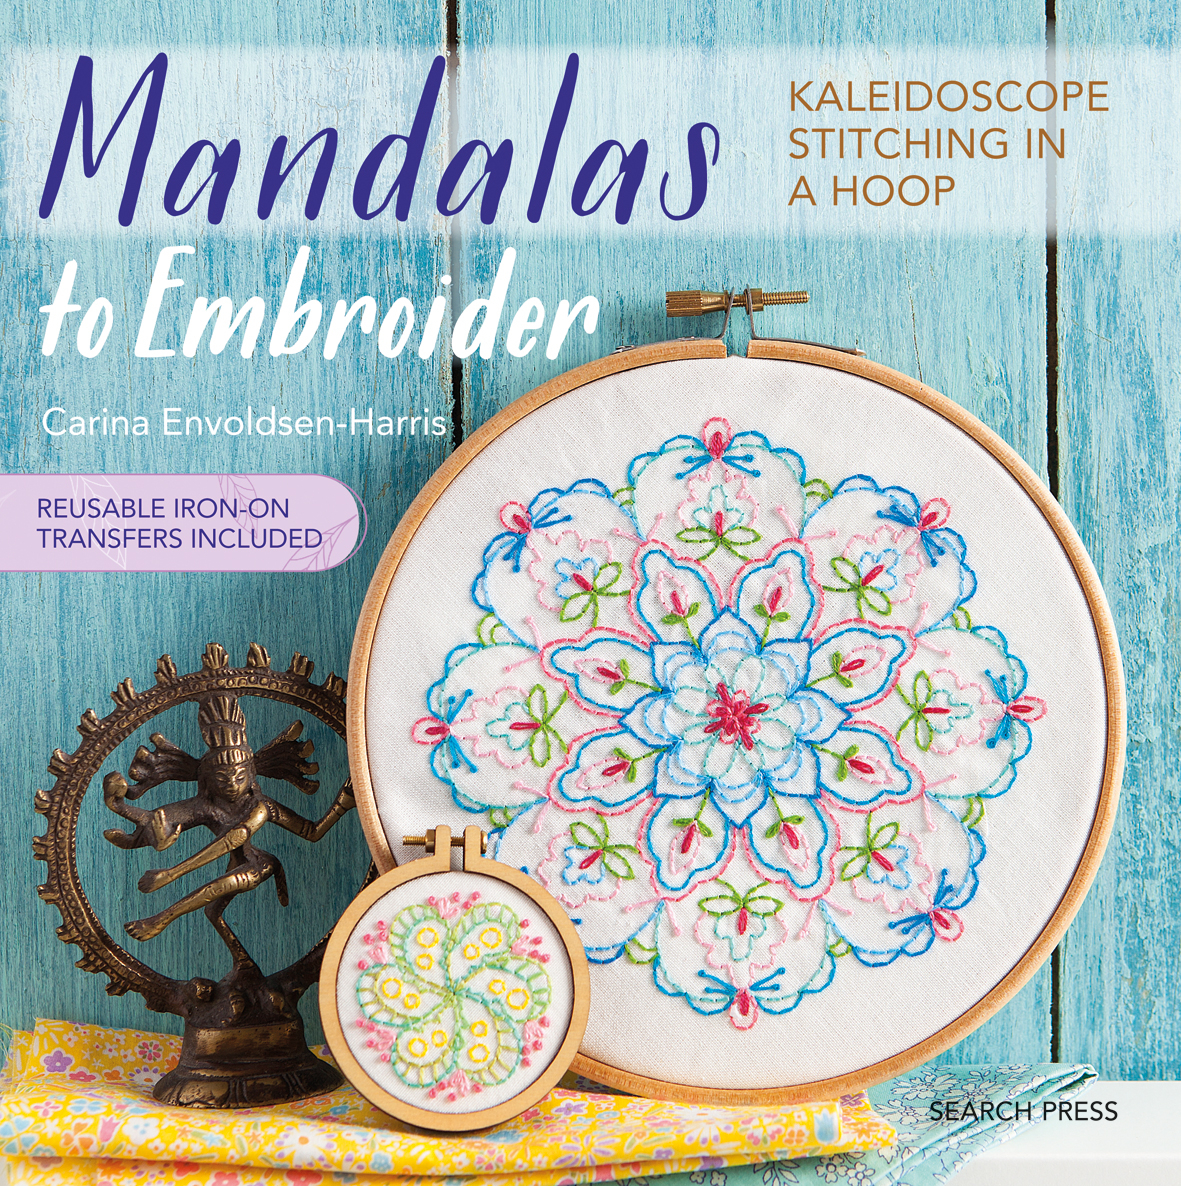 Iron On Transfer Patterns For Embroidery Search Press Mandalas To Embroider Carina Envoldsen Harris